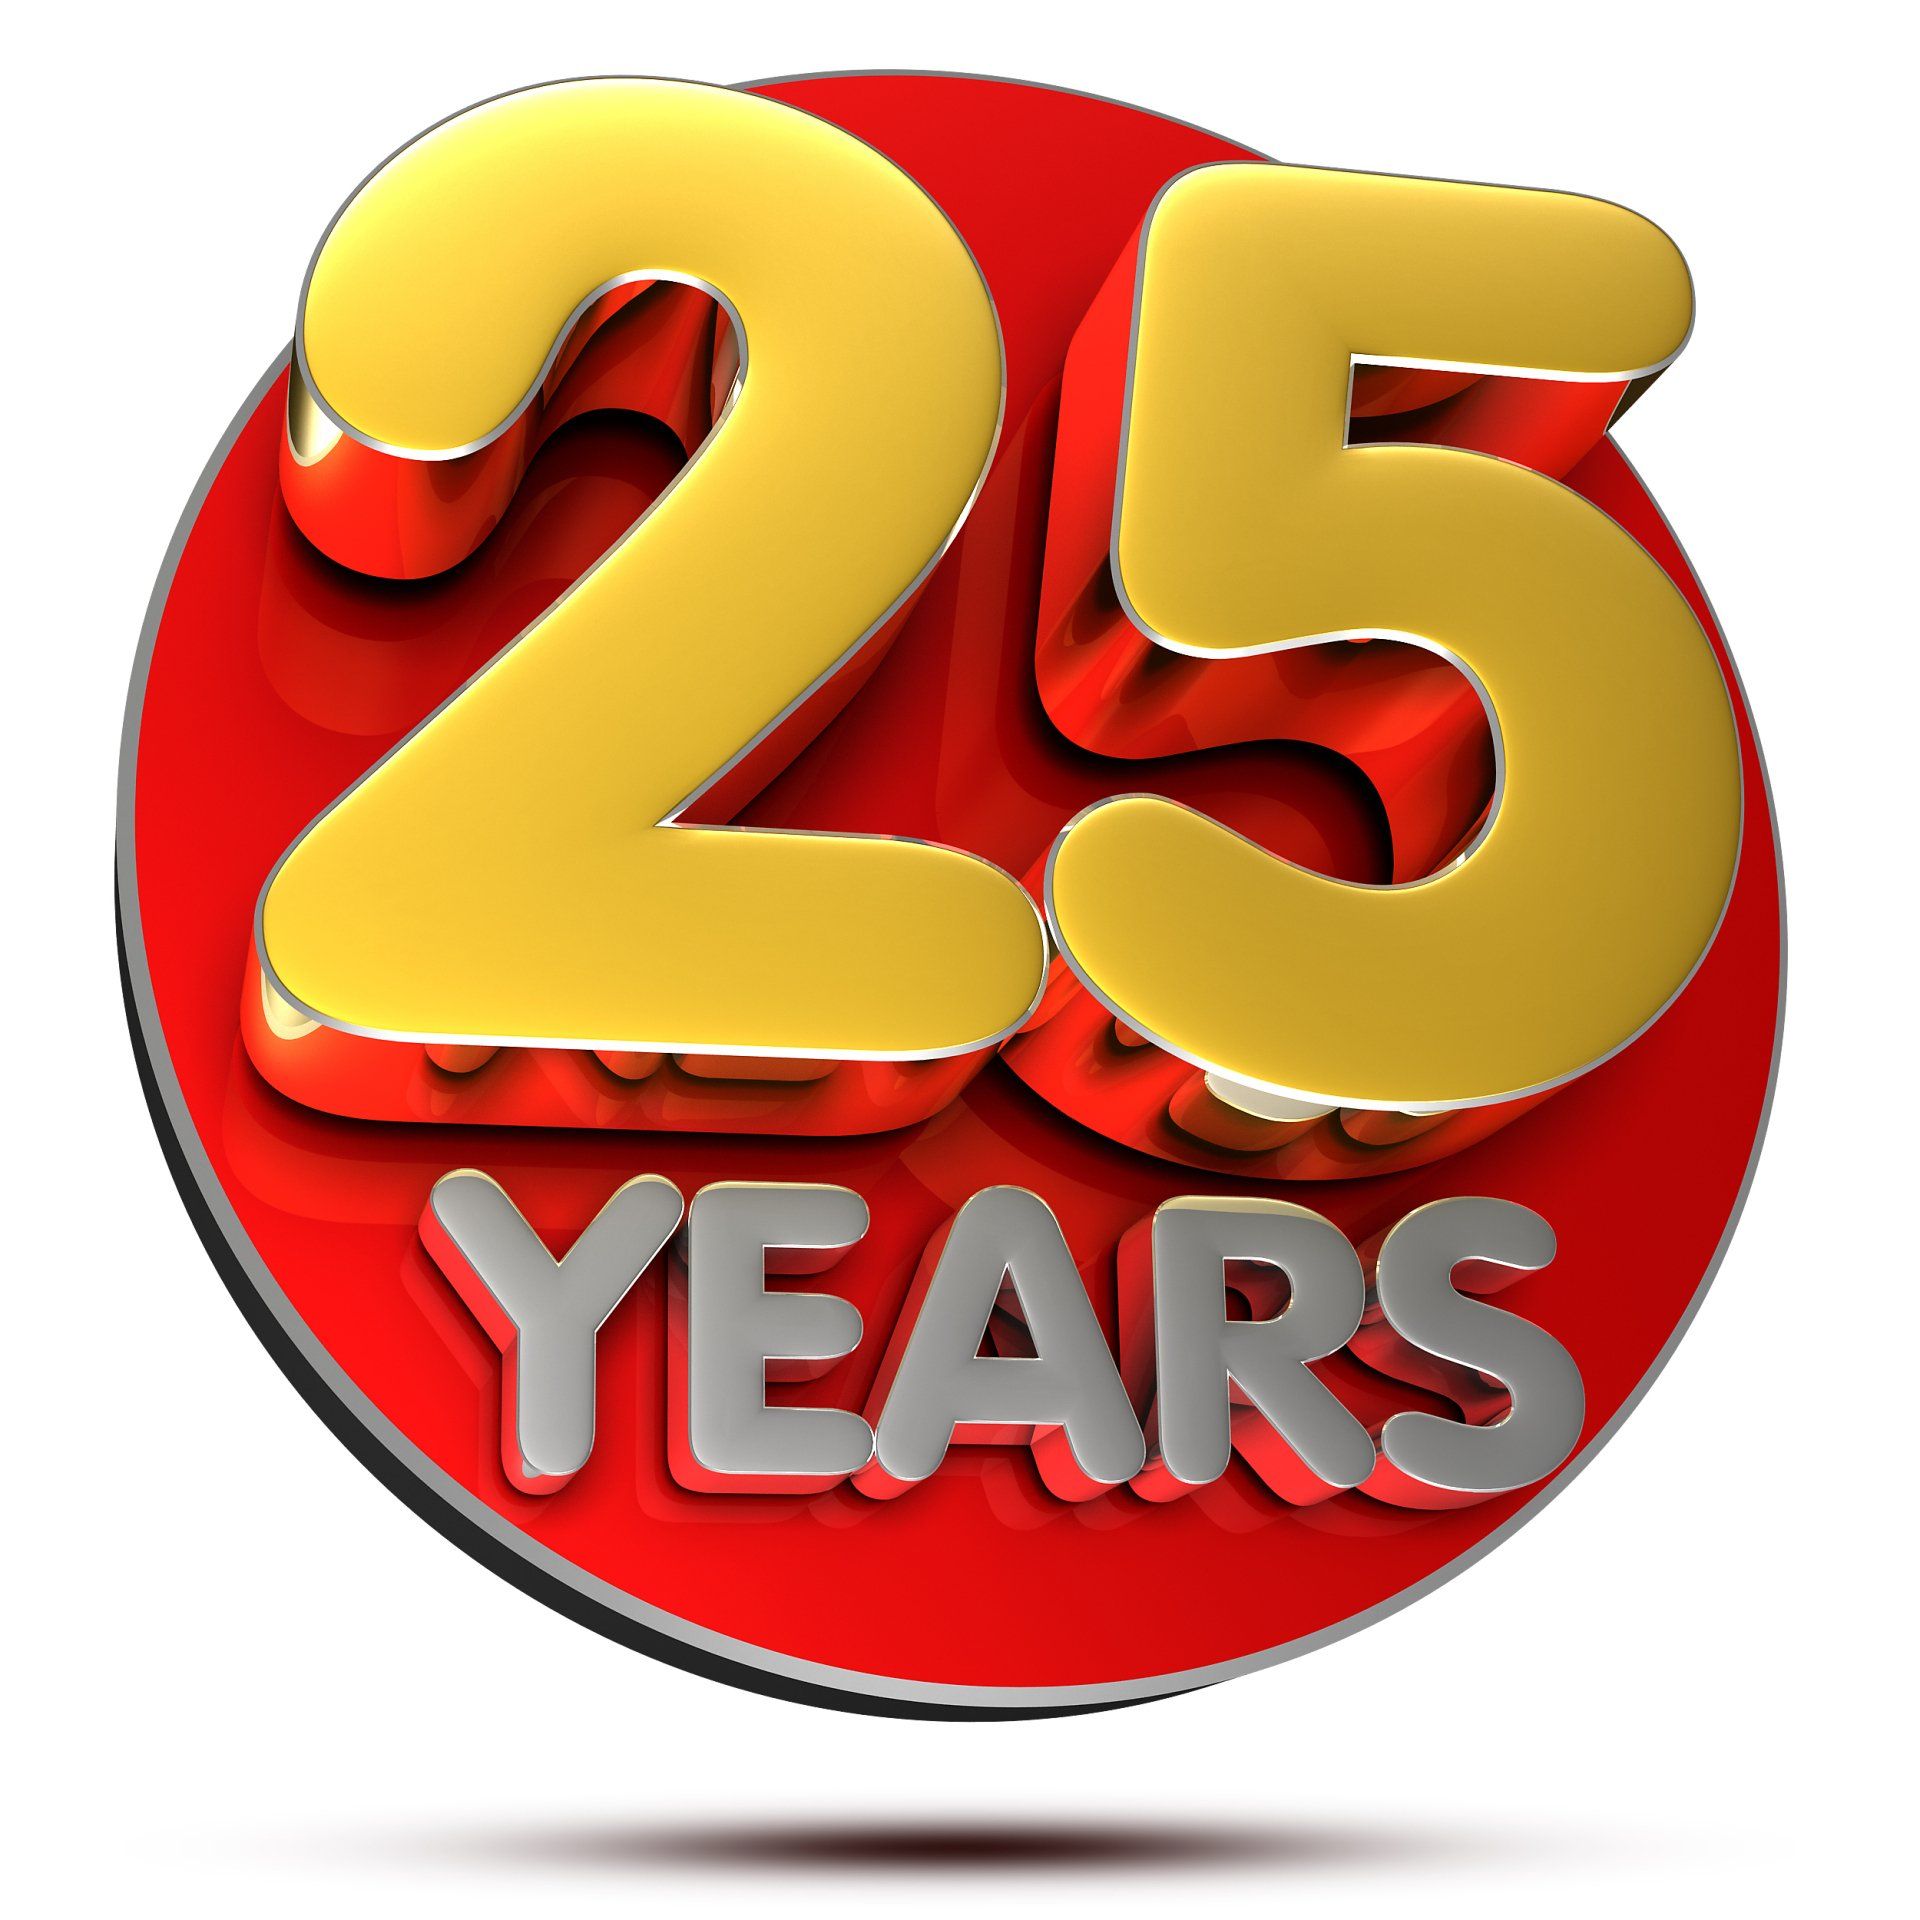 Established in 1997, Gas Training & Assessment Ltd is 25 years old this year! Over the years we’ve helped thousands of engineers achieve their career aspirations. 